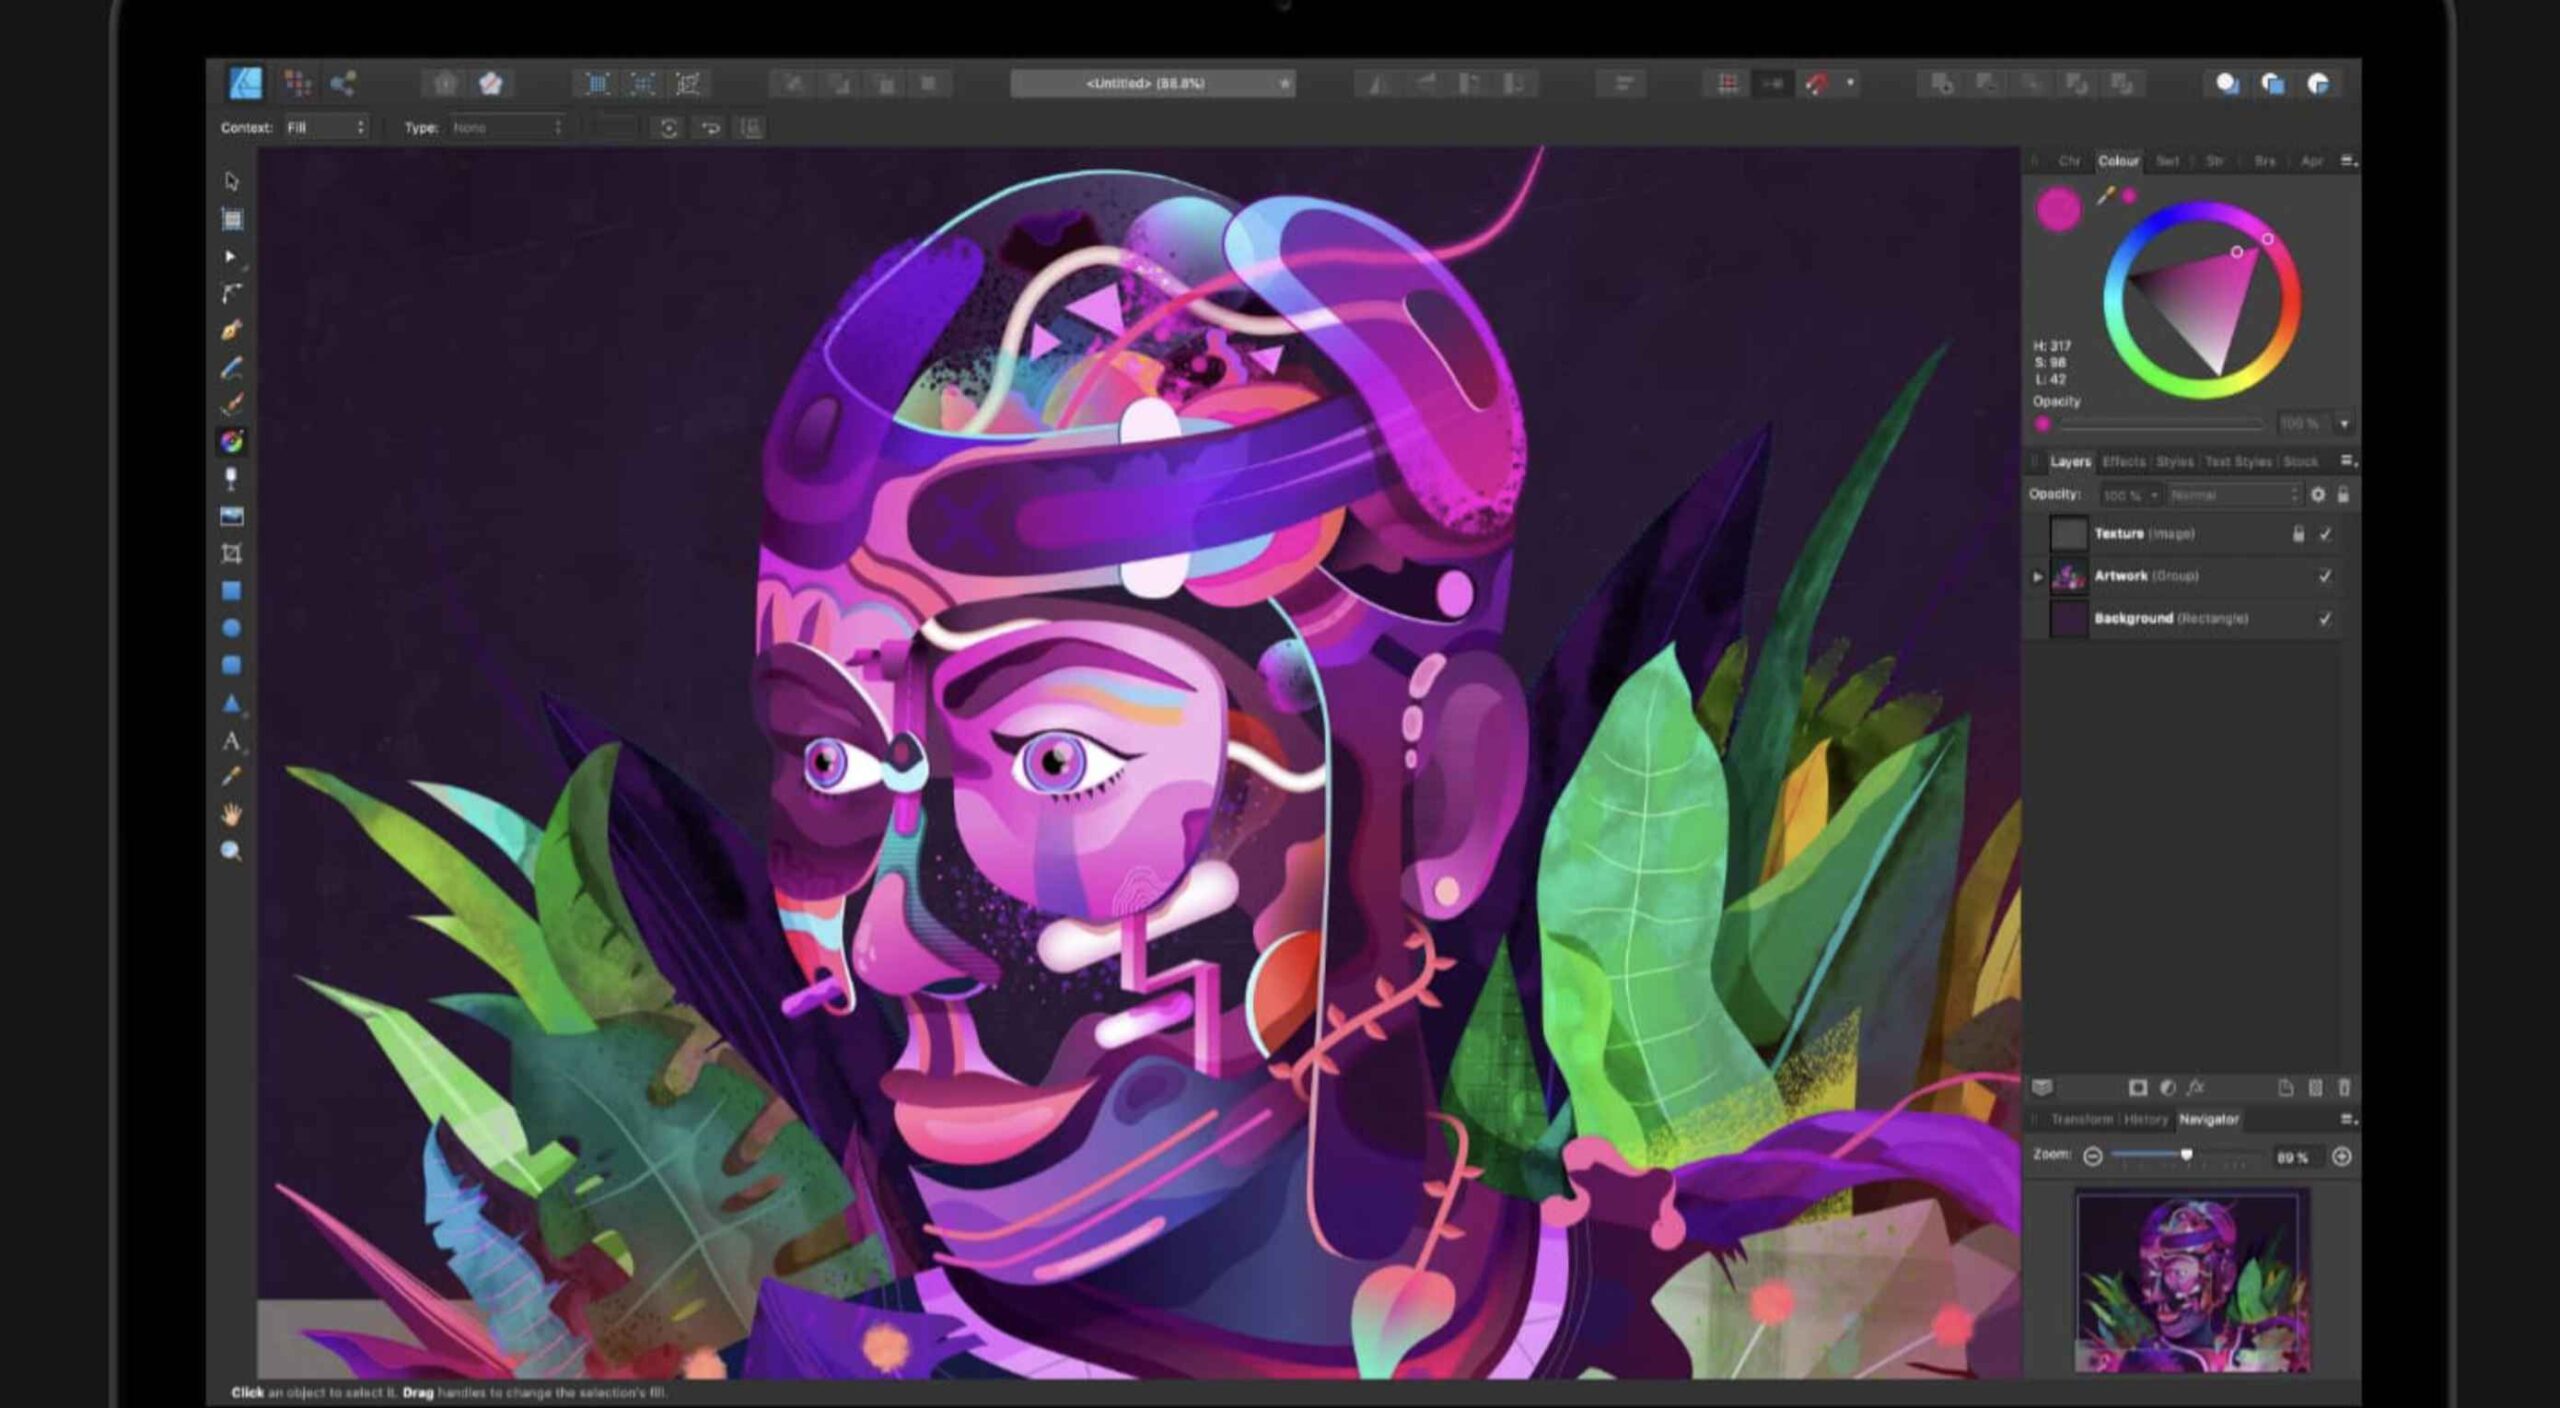 Ranked: Top 10 Illustration Apps in 2021